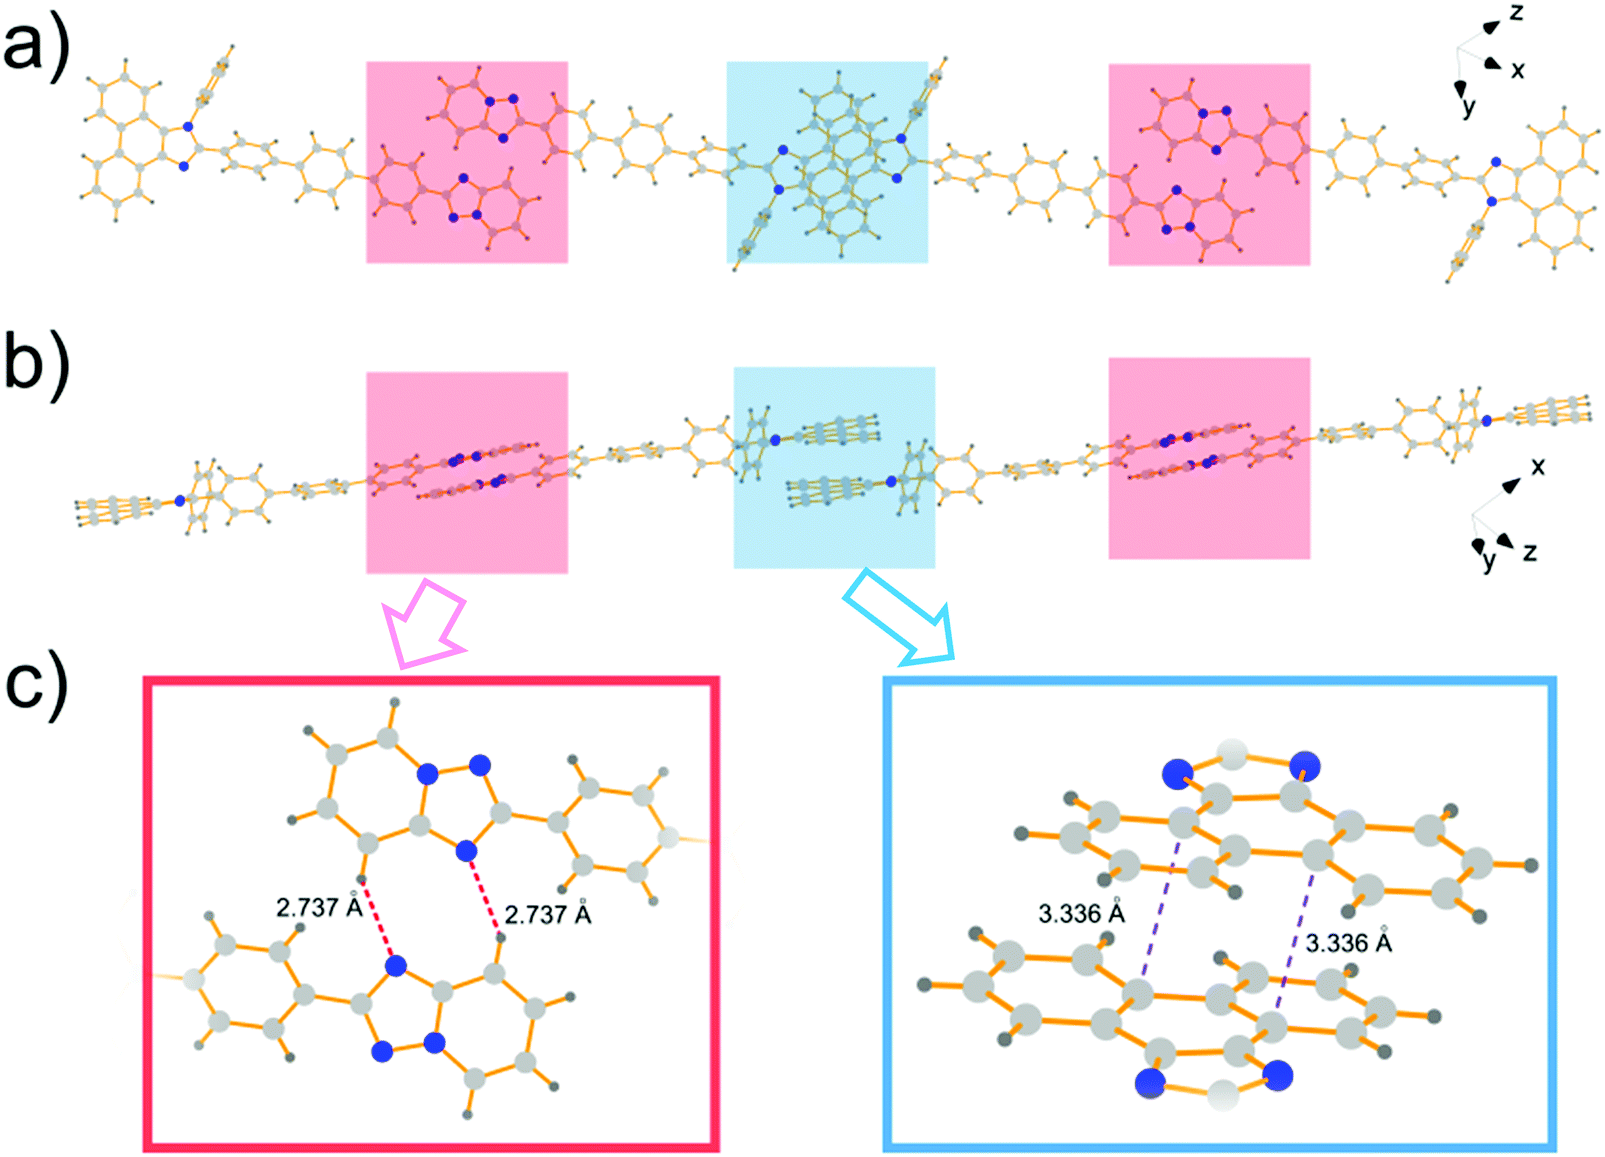 A Novel D P A Blue Fluorophore Based On 1 2 4 Triazolo 1 5 A Pyridine As An Electron Acceptor And Its Application In Organic Light Emitting Diodes Materials Chemistry Frontiers Rsc Publishing Doi 10 1039 C8qmd